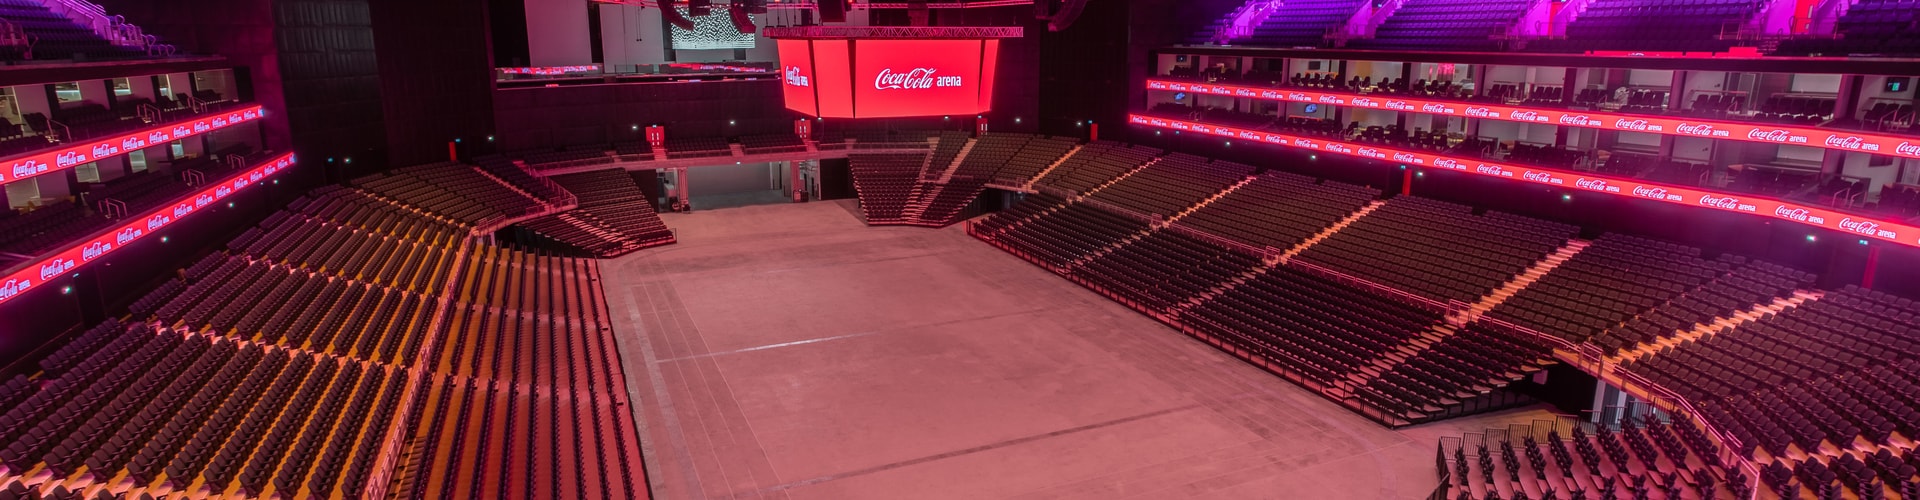 Meraas signs exclusive ten-year naming rights deal with Coca-Cola for Dubai Arena, to become Coca-Cola Arena